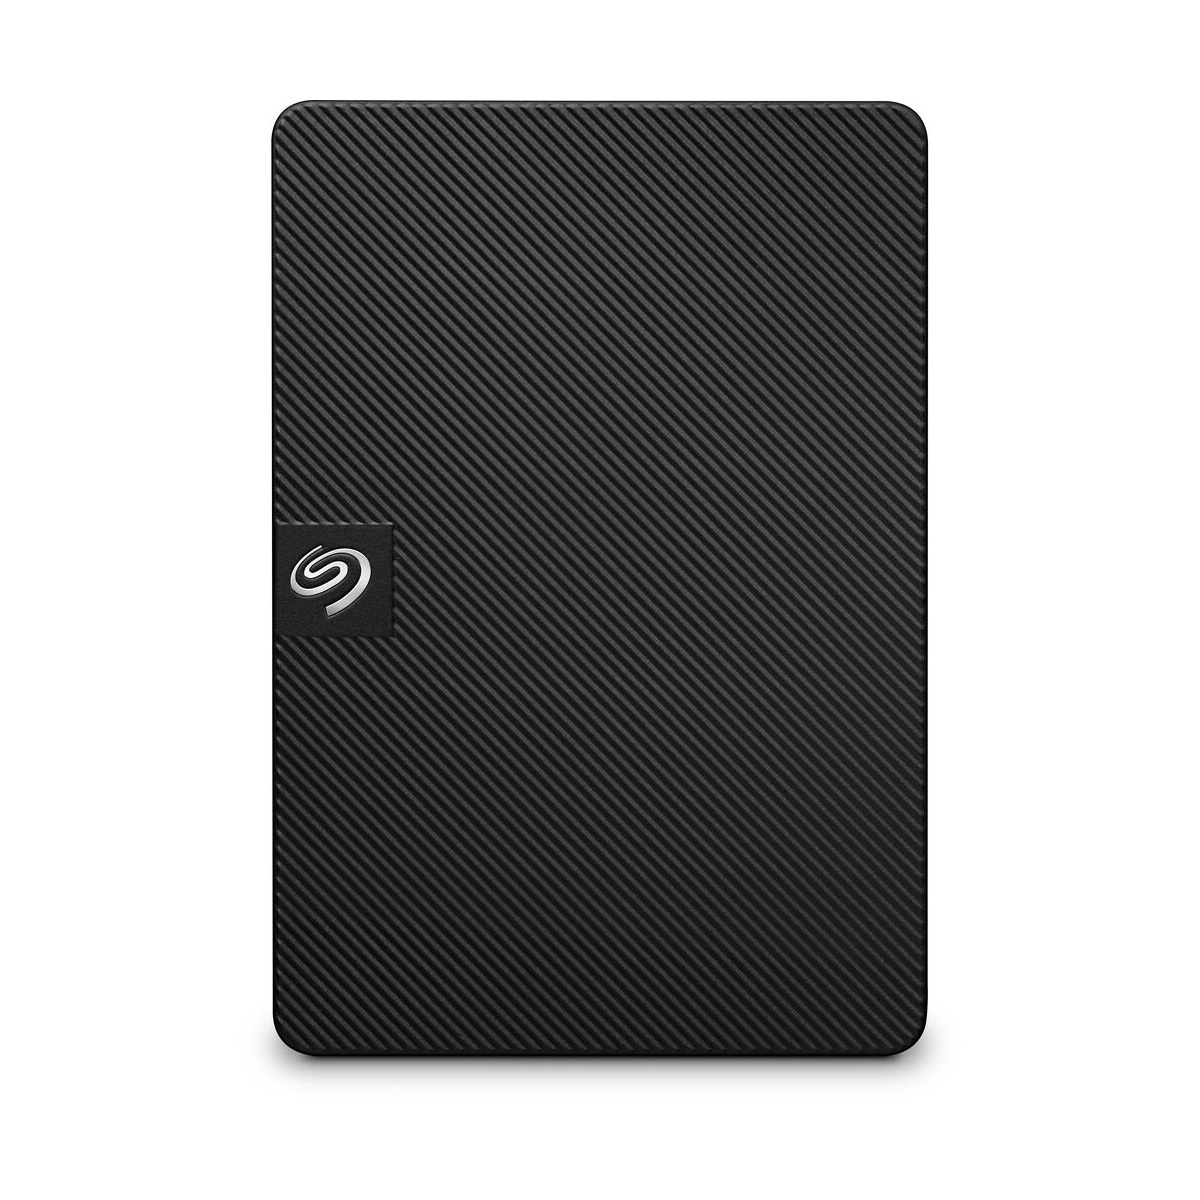 Ổ cứng Seagate Expansion 2021